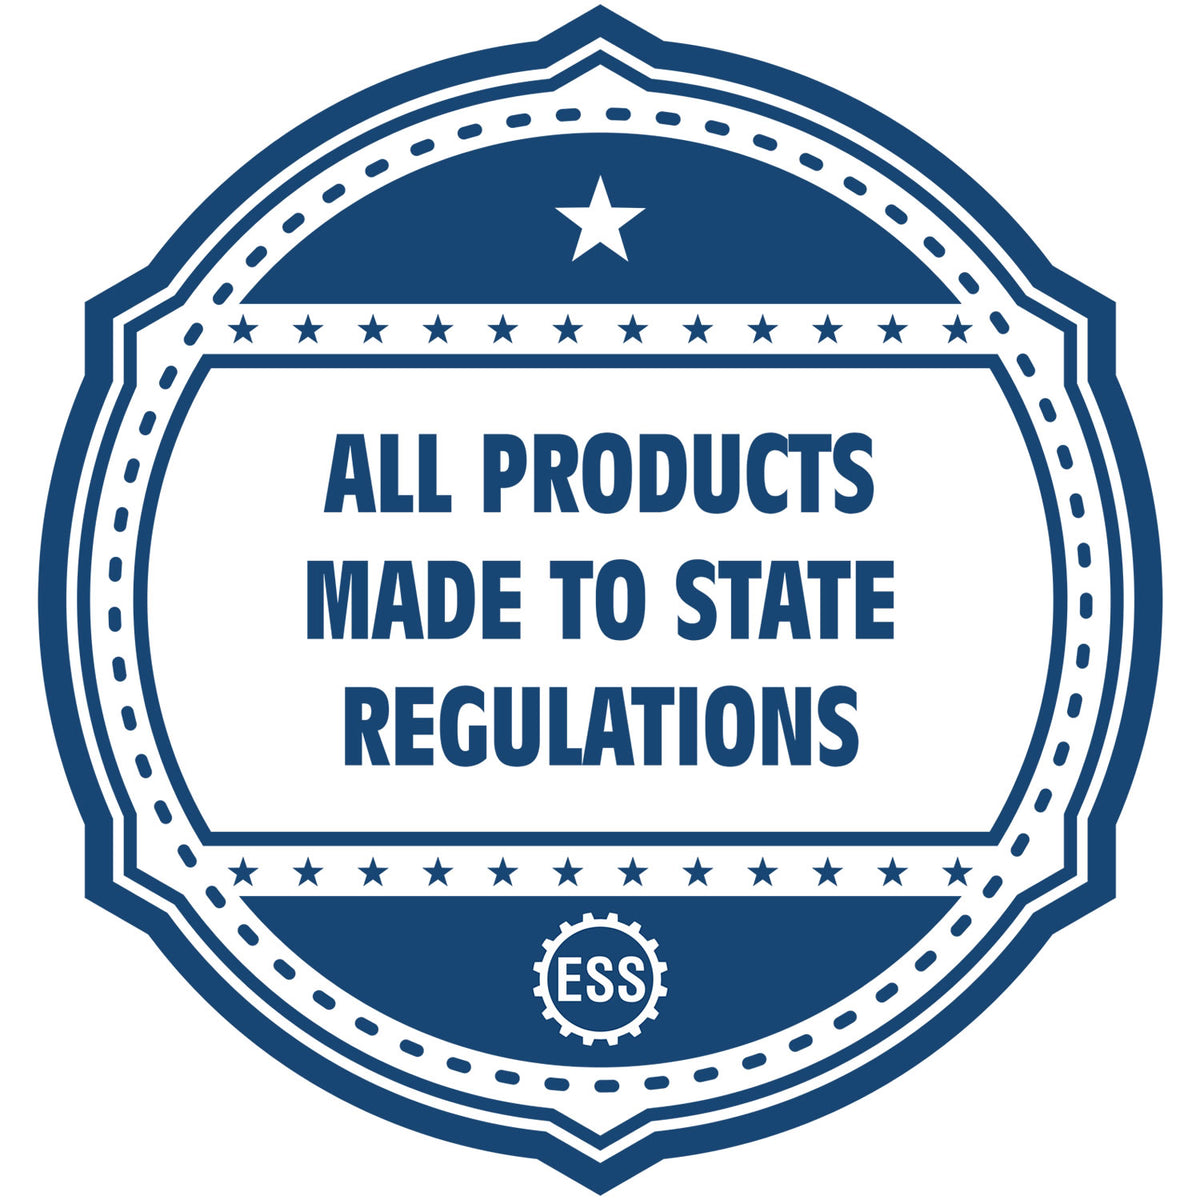 An icon or badge element for the State of Alaska Architectural Seal Embosser showing that this product is made in compliance with state regulations.